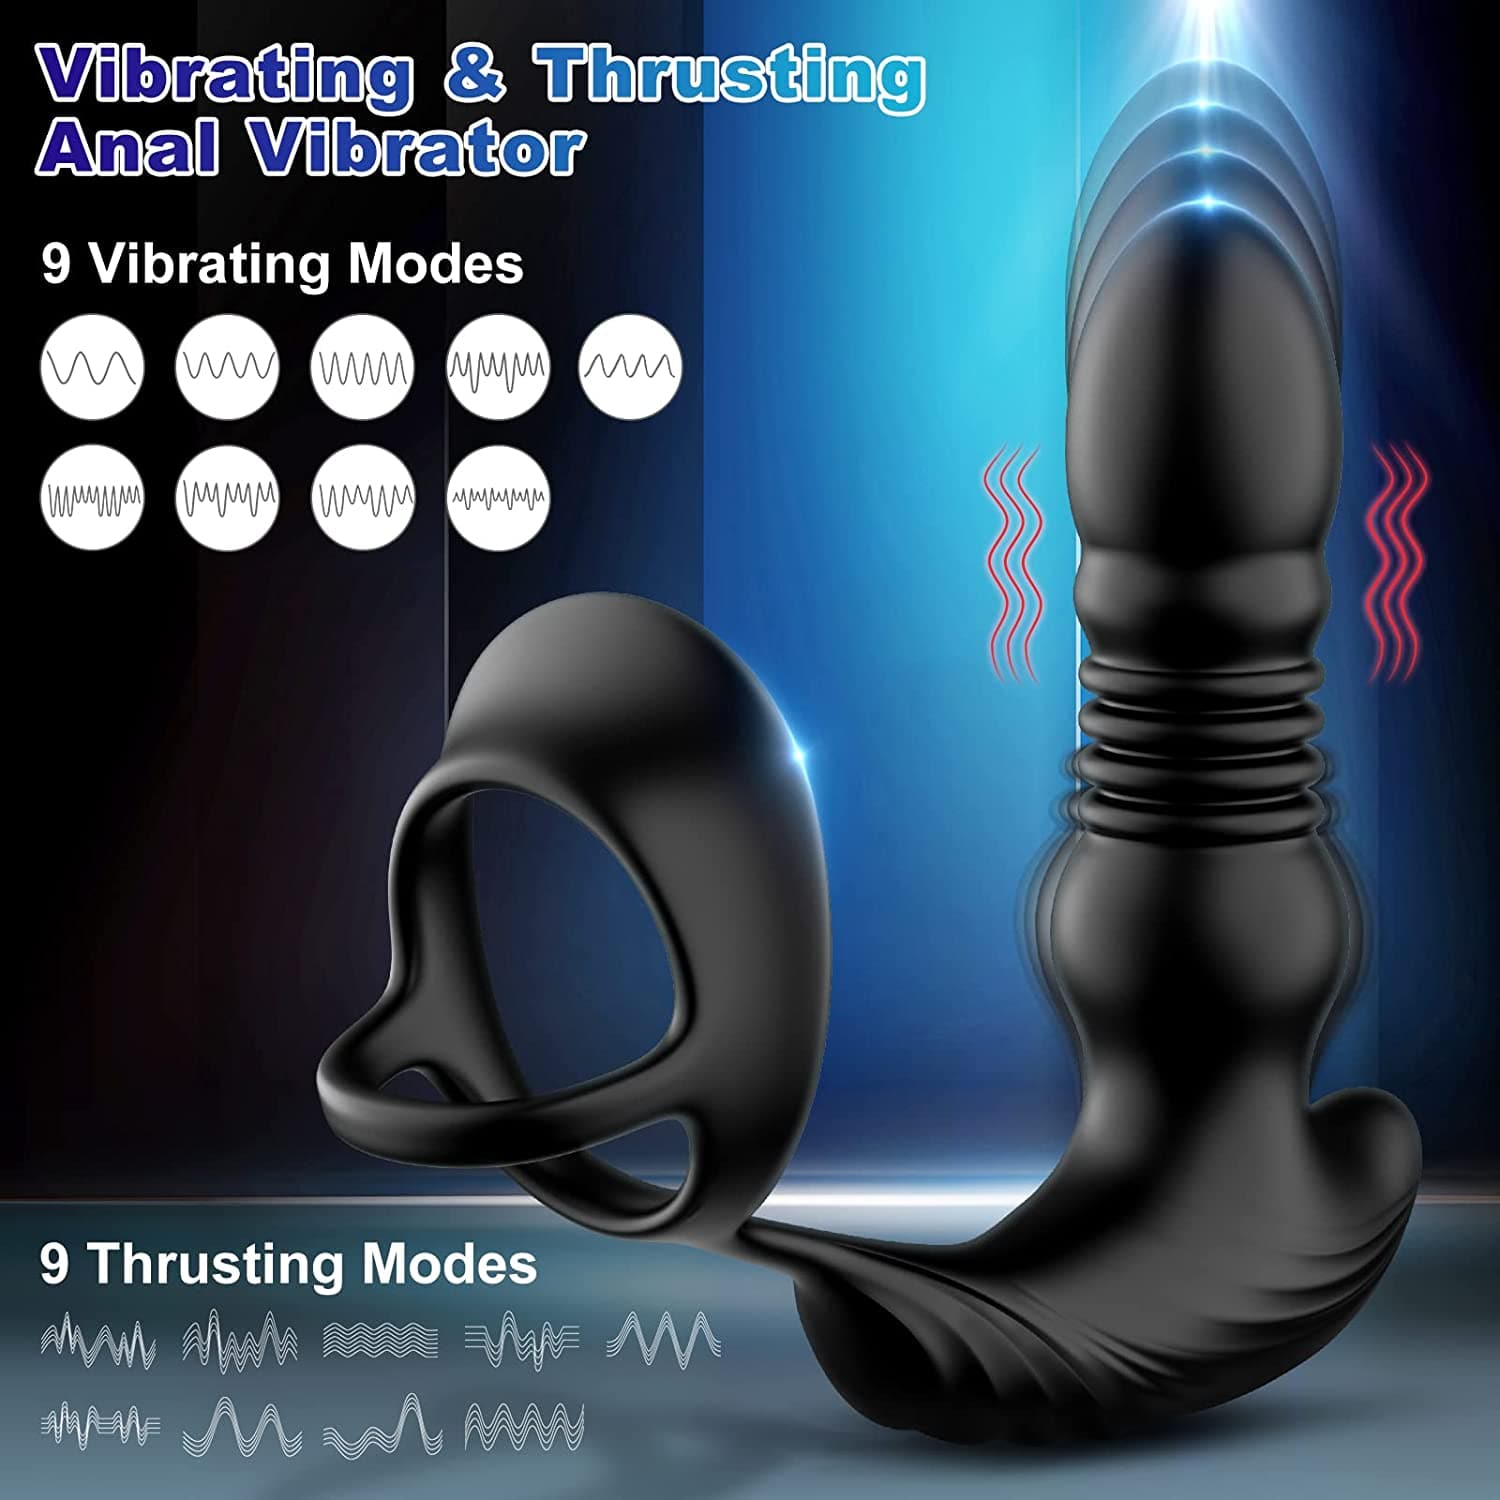 9 insertion and vibration modes prostate massager with cock ring, app and remote control anal sex toy